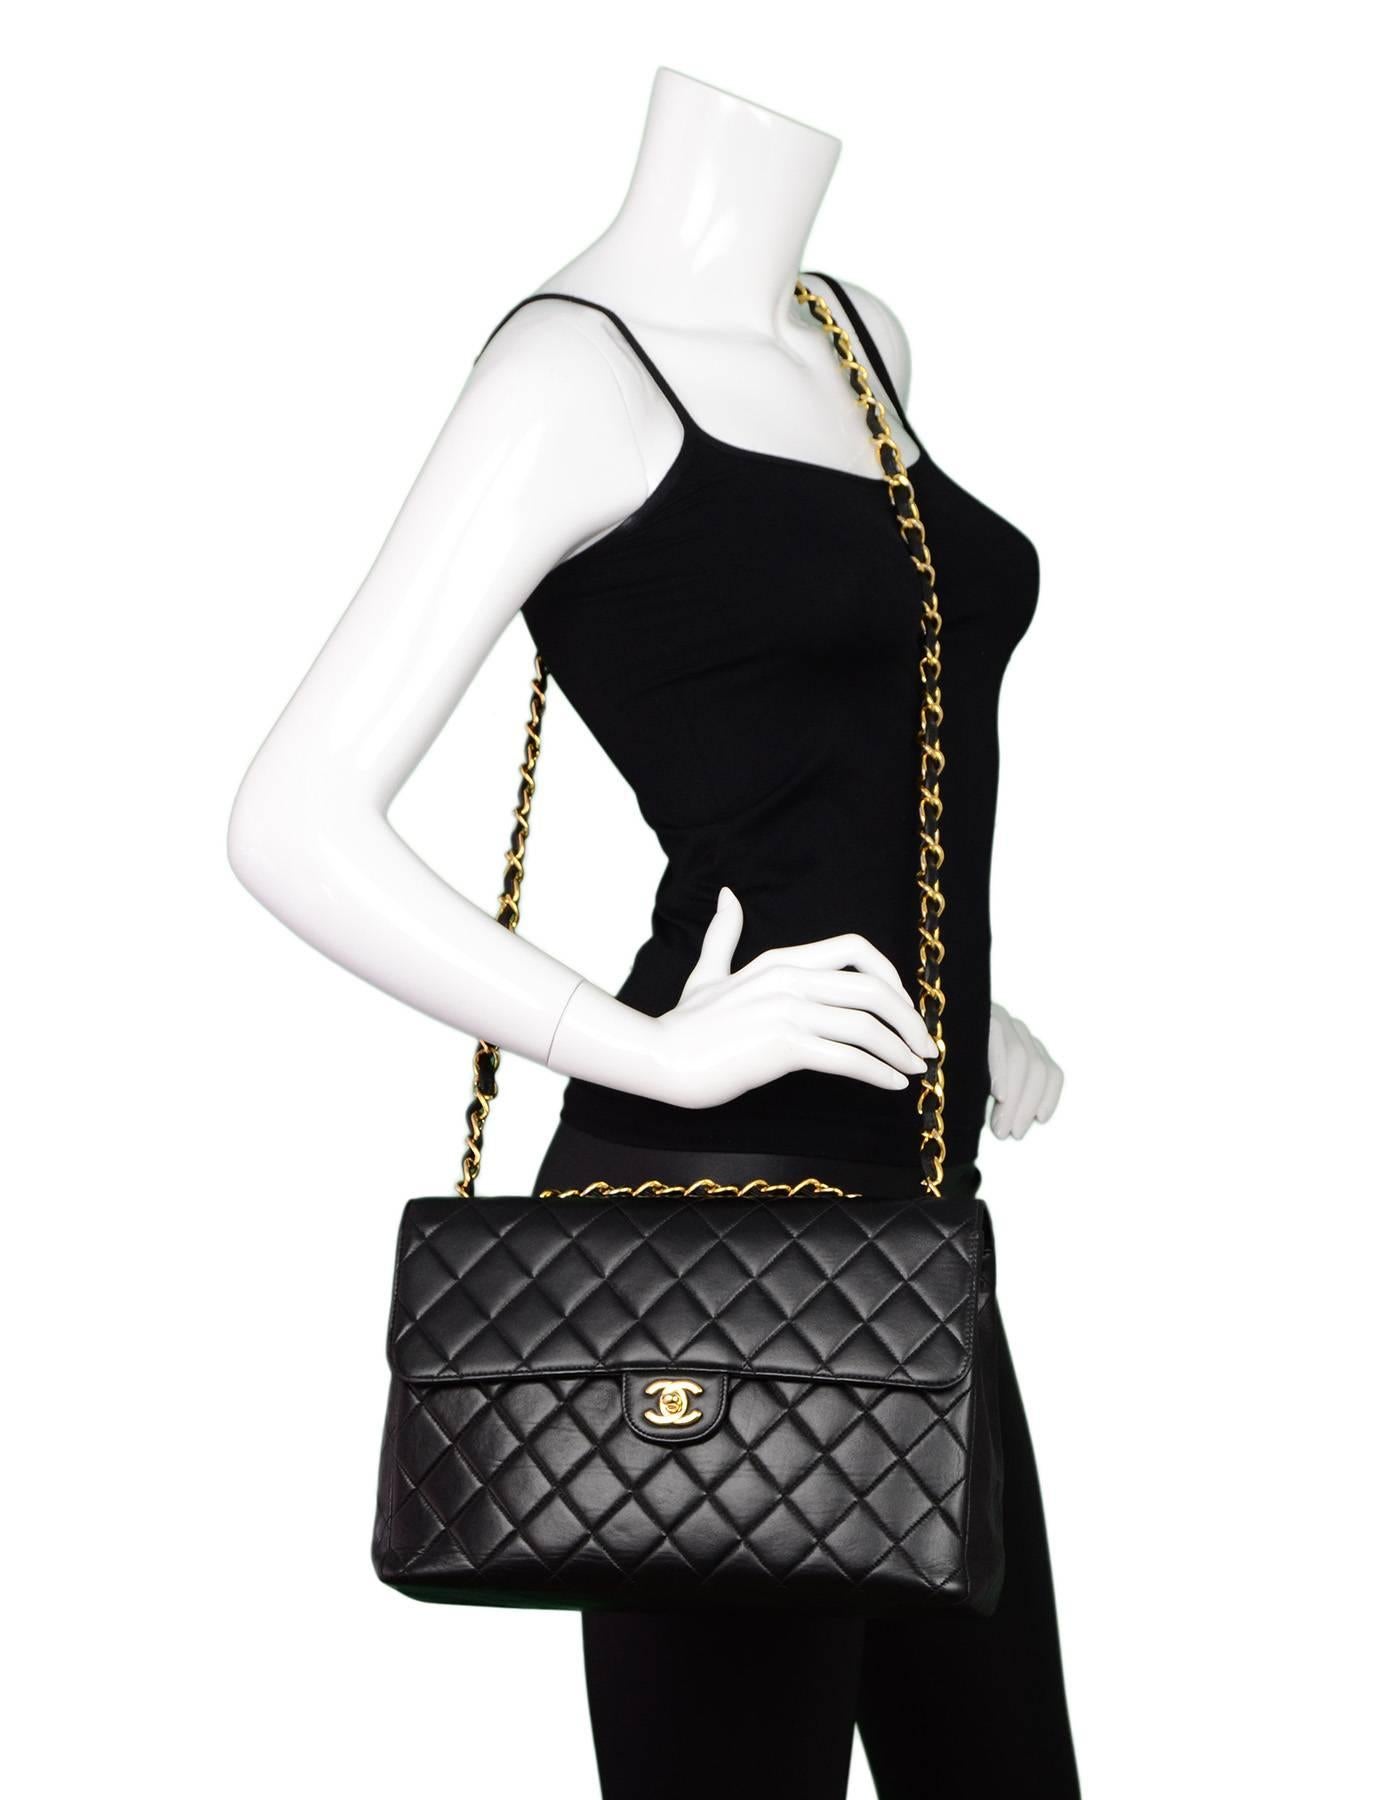 Chanel Black Lambskin Leather Quilted Classic Jumbo Single Flap Bag 5